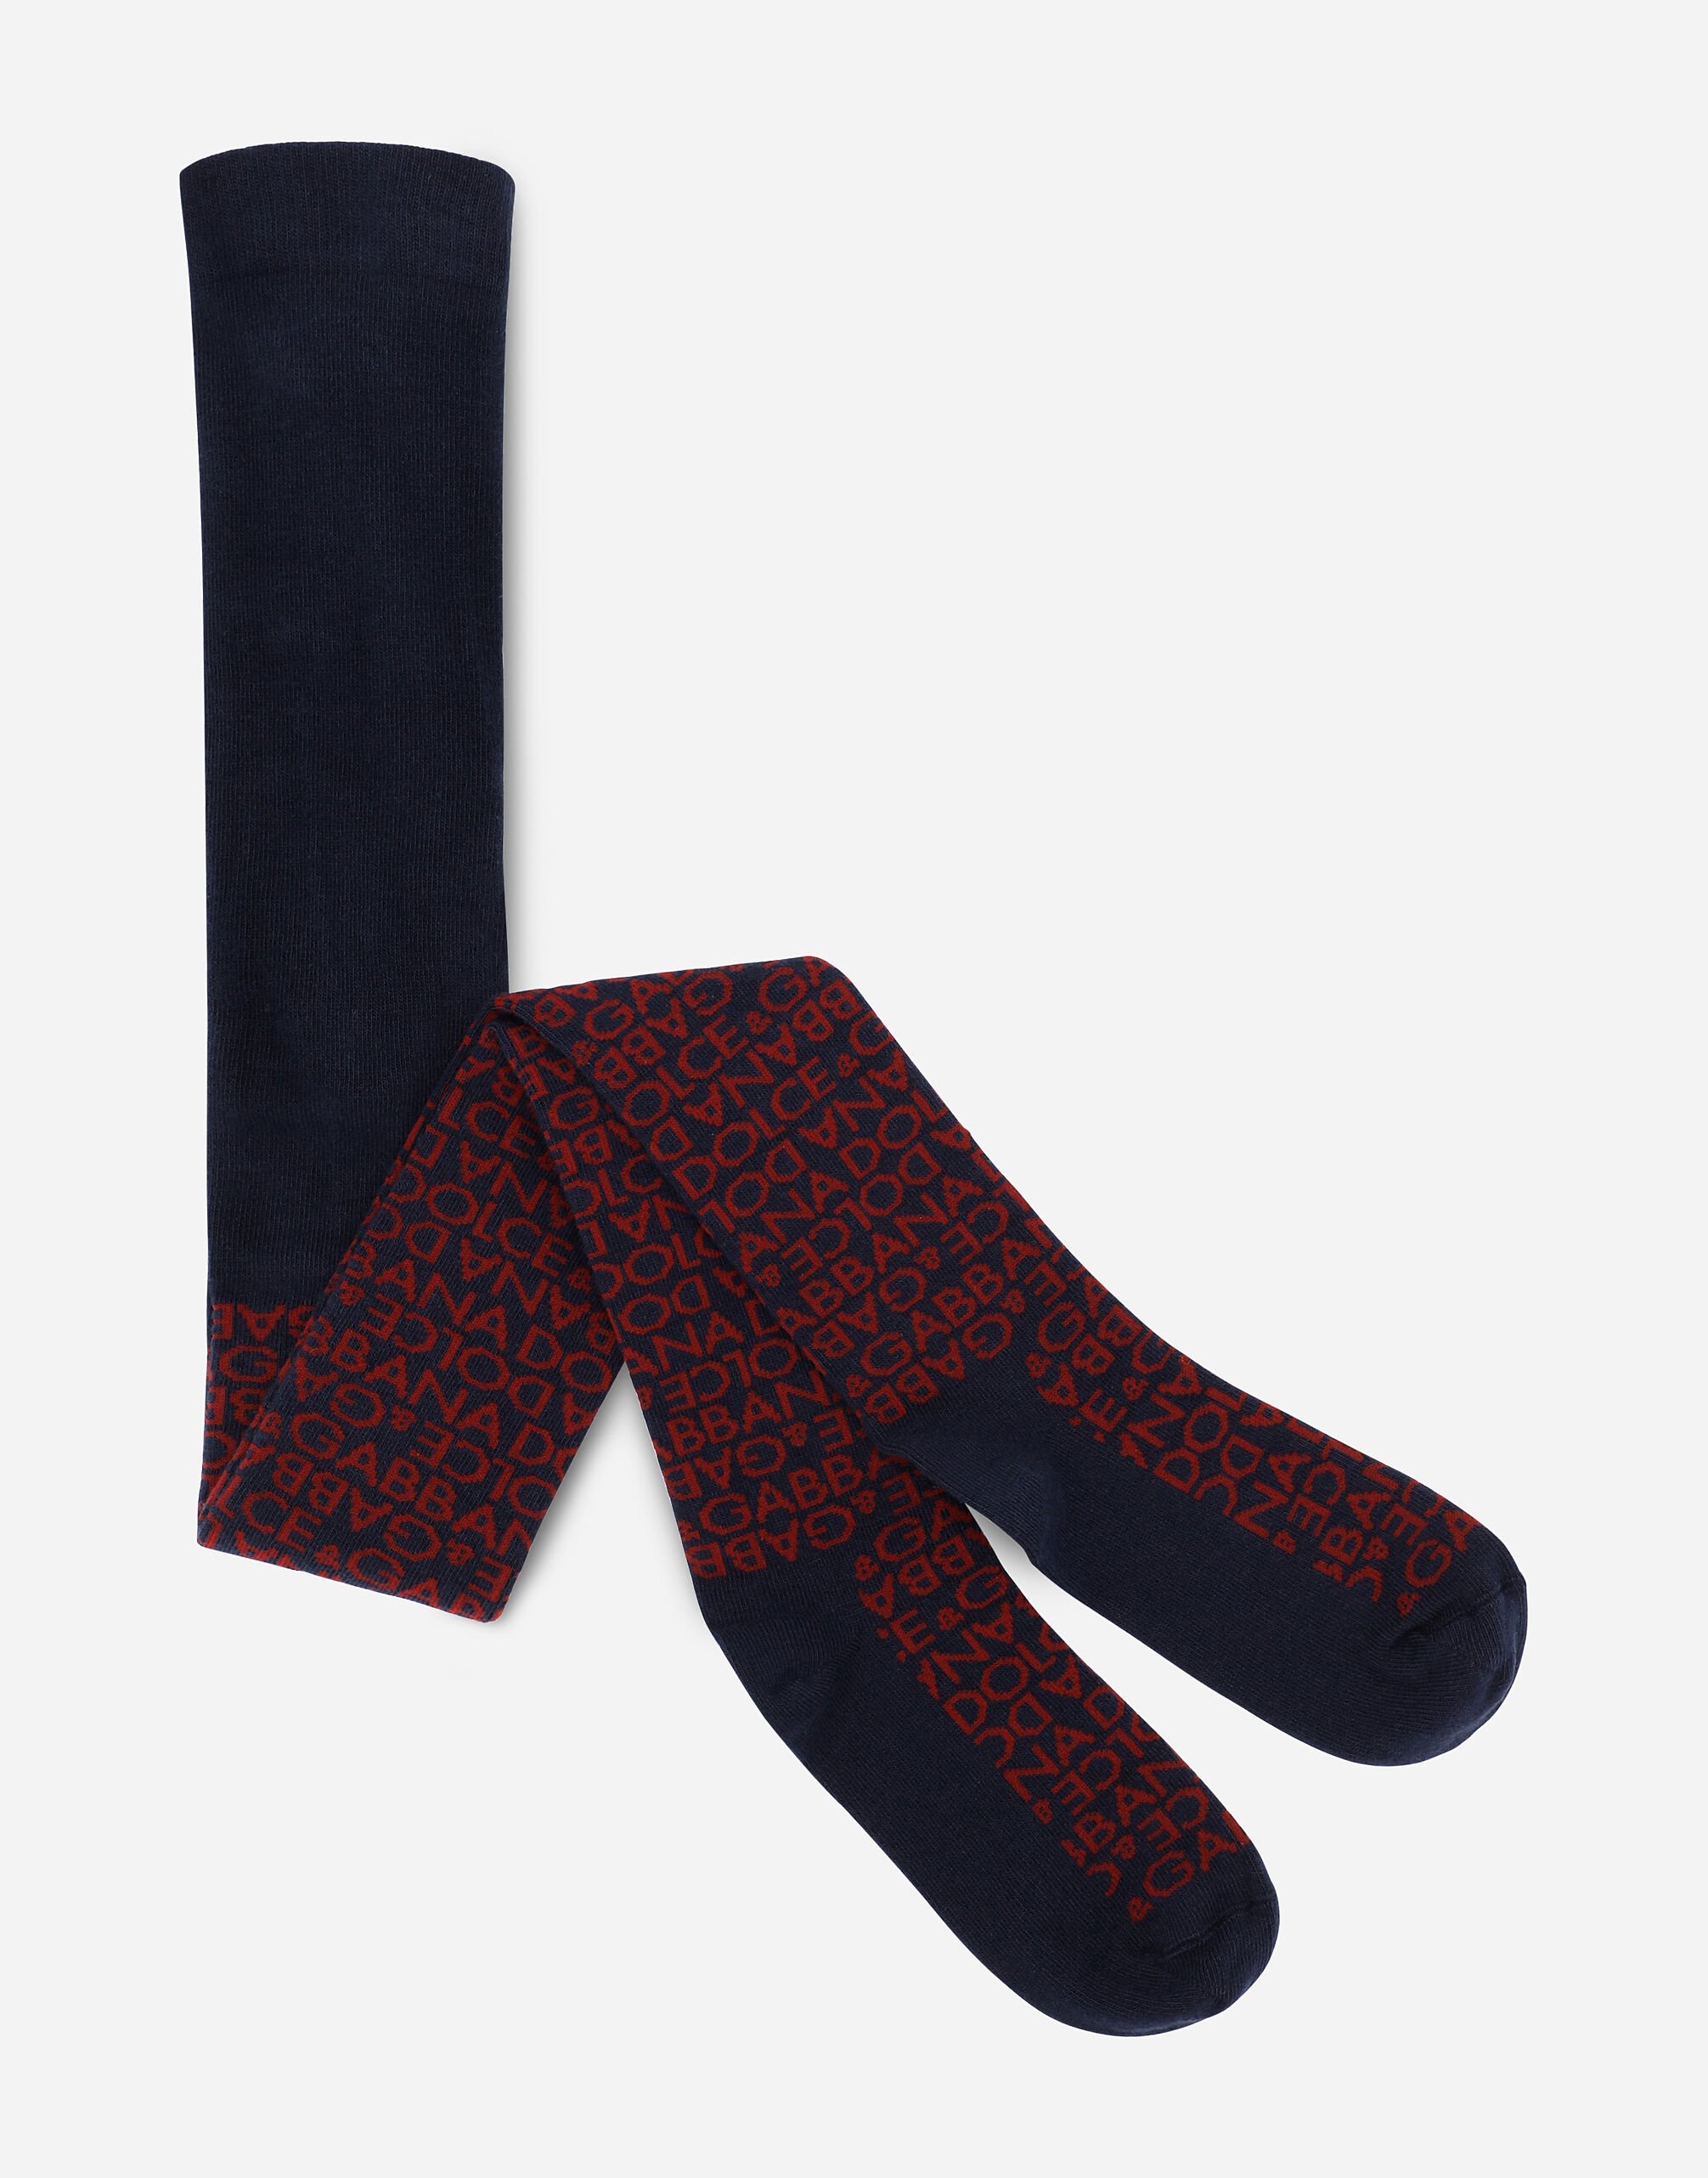 ${brand} Jacquard knit tights with Dolce&Gabbana logo ${colorDescription} ${masterID}